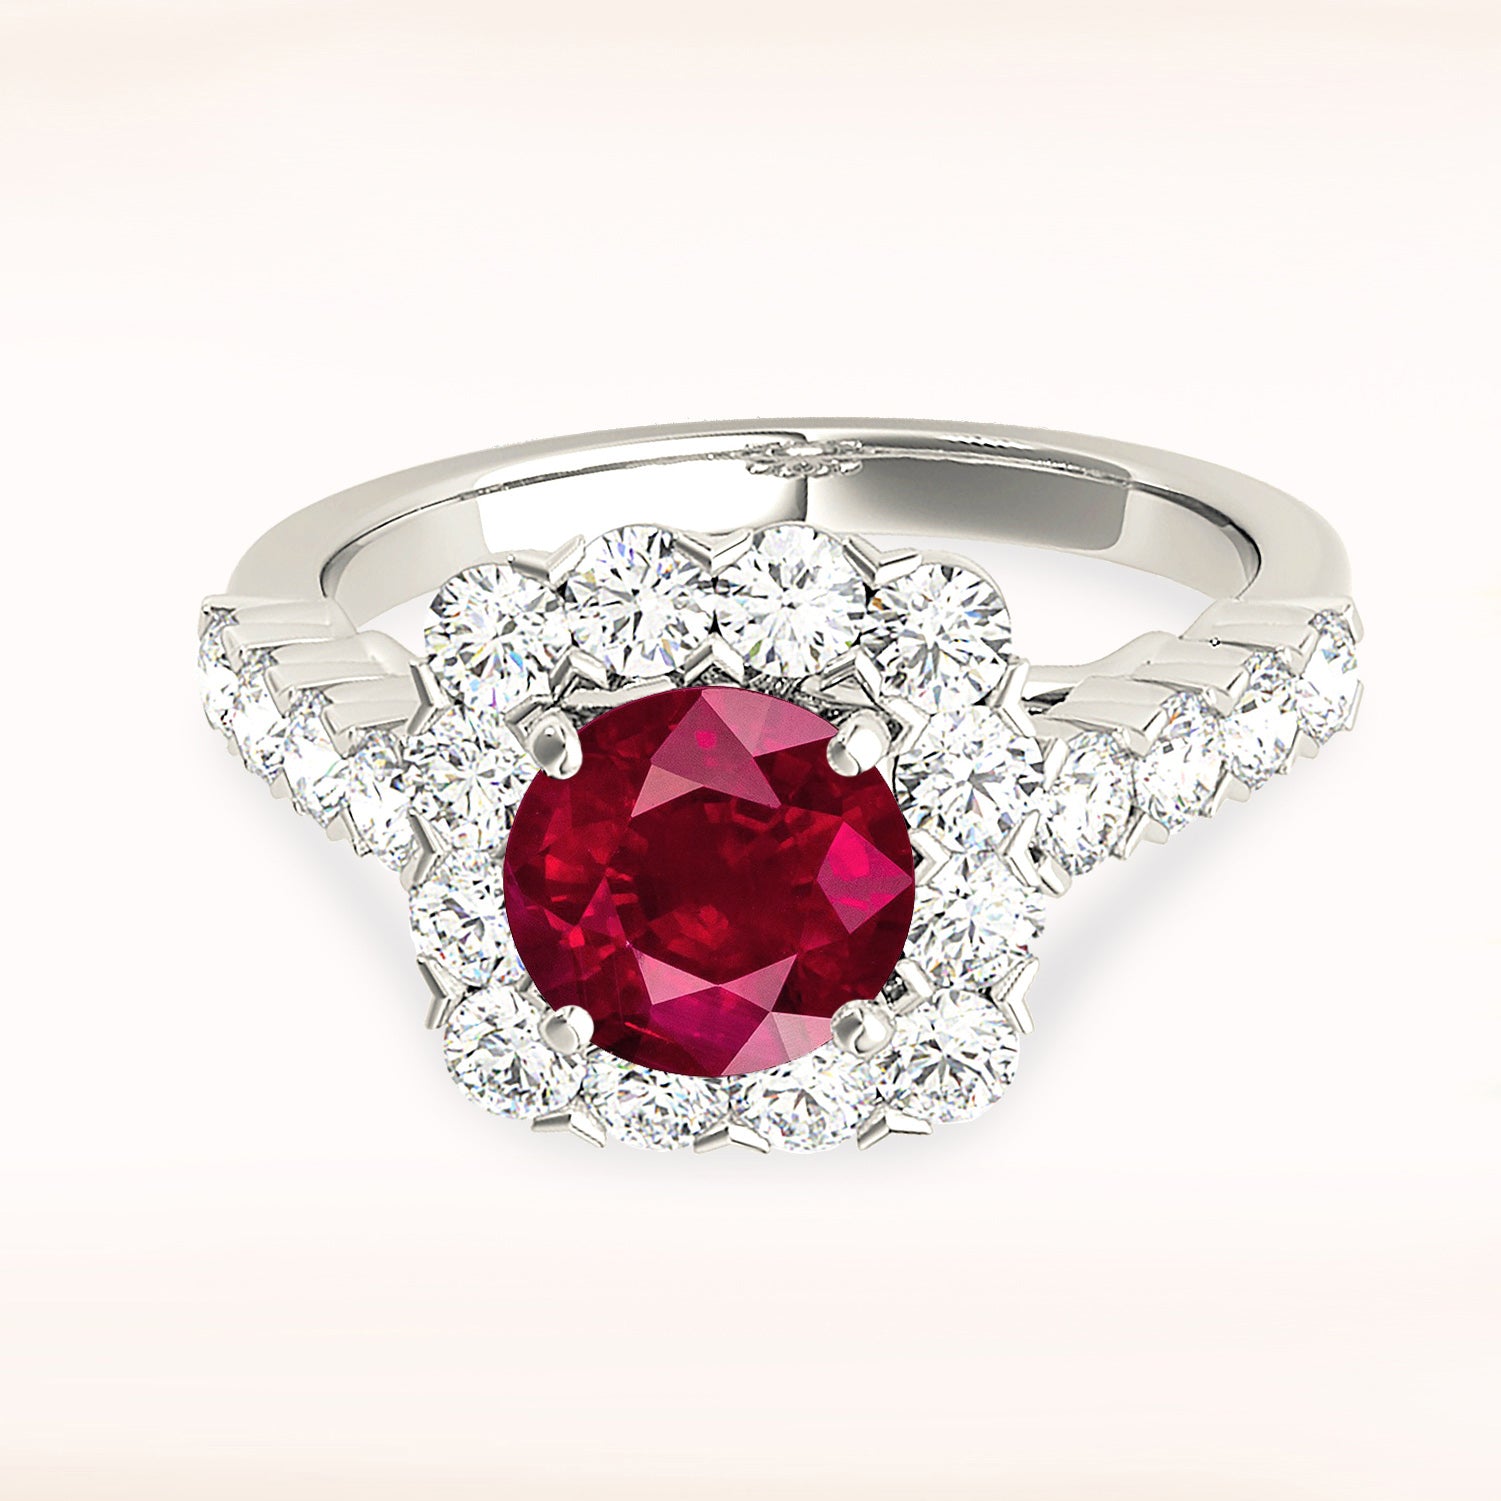 2.35 ct. Genuine Ruby Ring With 1.35 ctw. Diamond Cushion Halo And Scalloped Diamond Band-in 14K/18K White, Yellow, Rose Gold and Platinum - Christmas Jewelry Gift -VIRABYANI